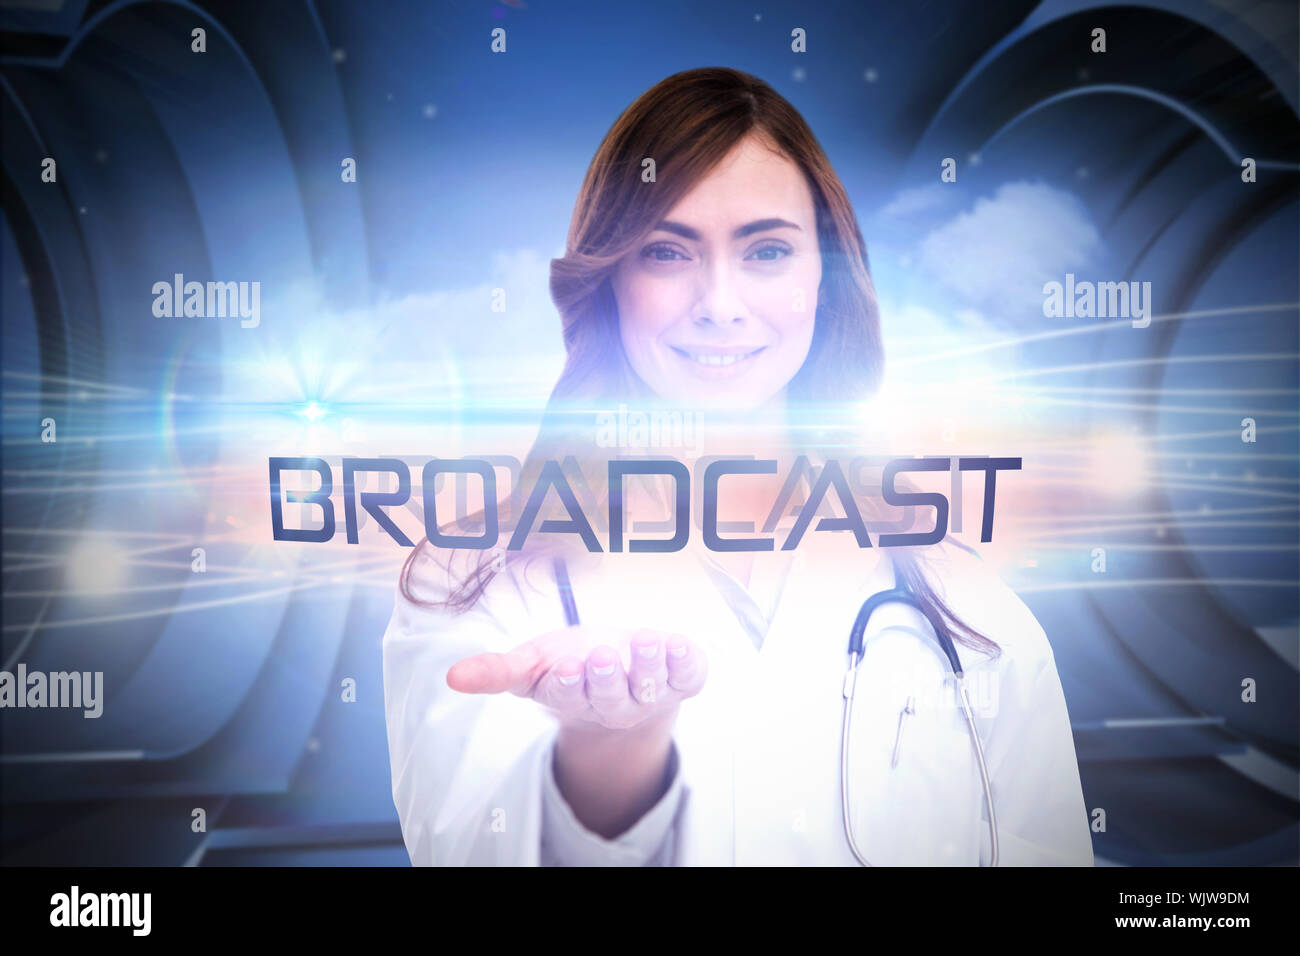 The word broadcast and portrait of female nurse holding out open palm against abstract white cloud design Stock Photo